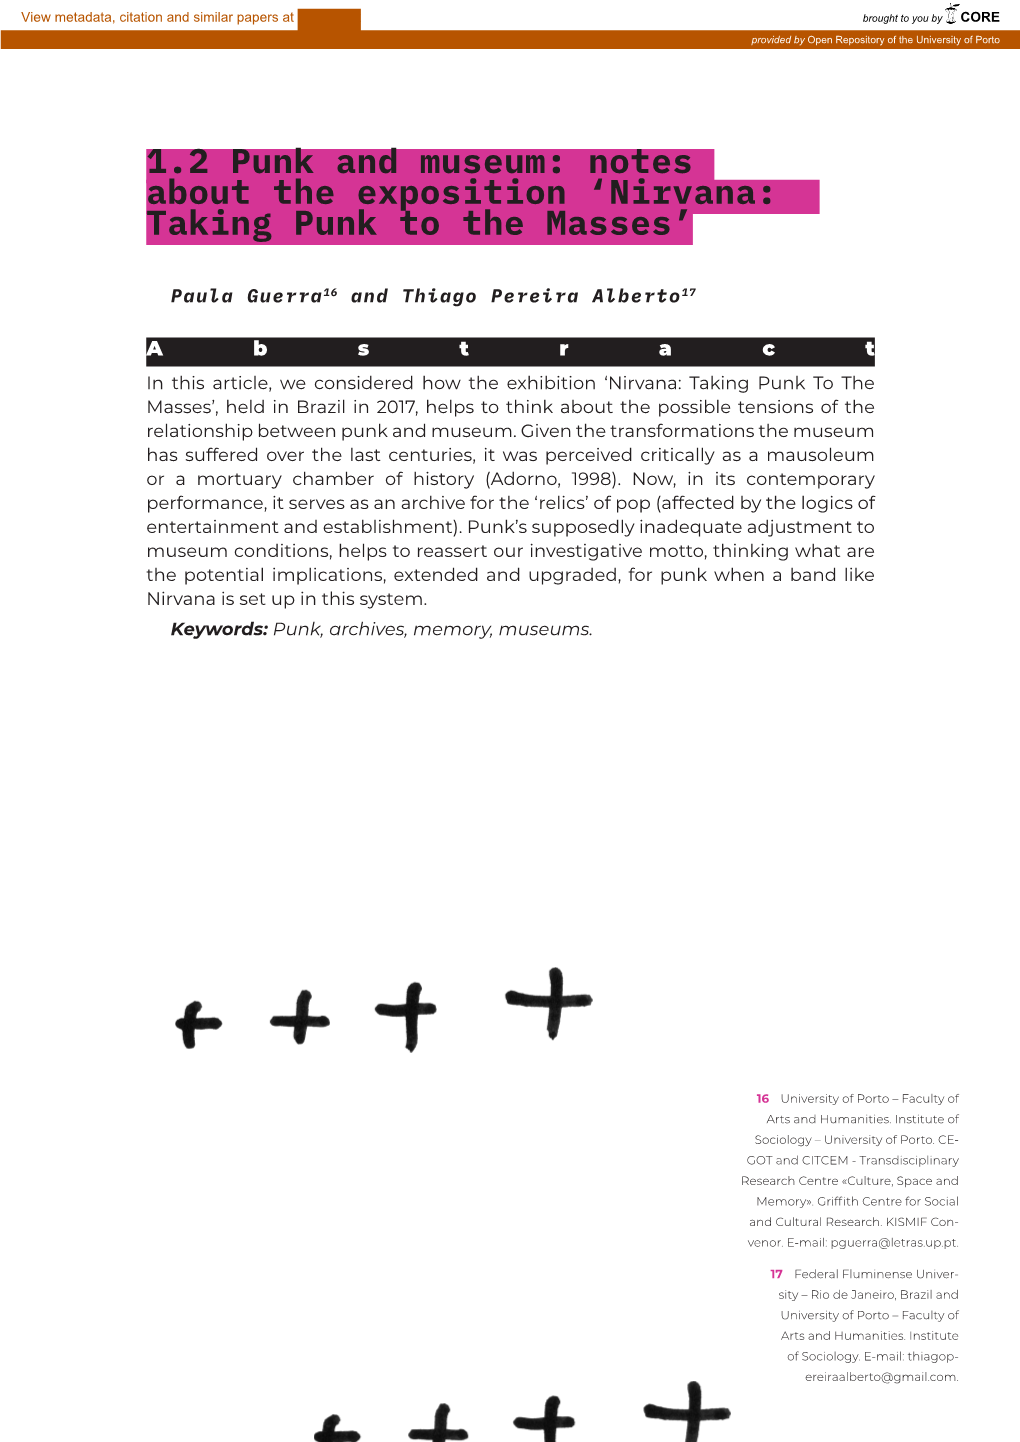 1.2 Punk and Museum: Notes About the Exposition 'Nirvana: Taking